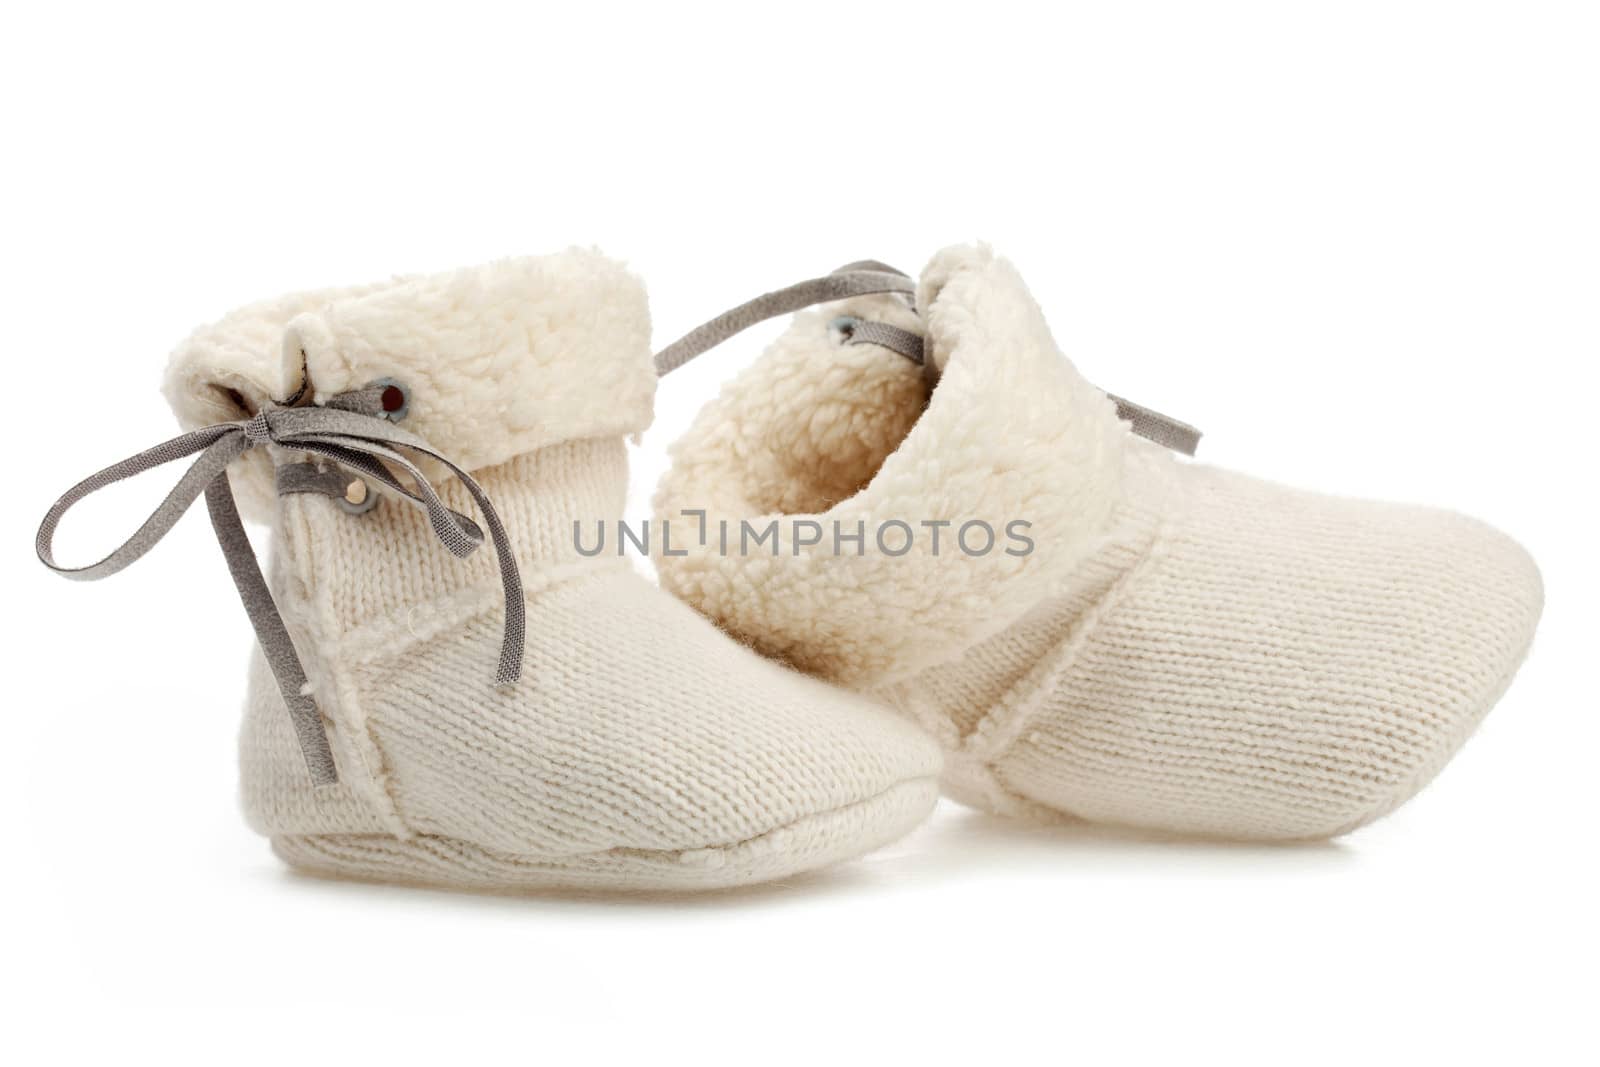 Pair of baby booties over white by photobac